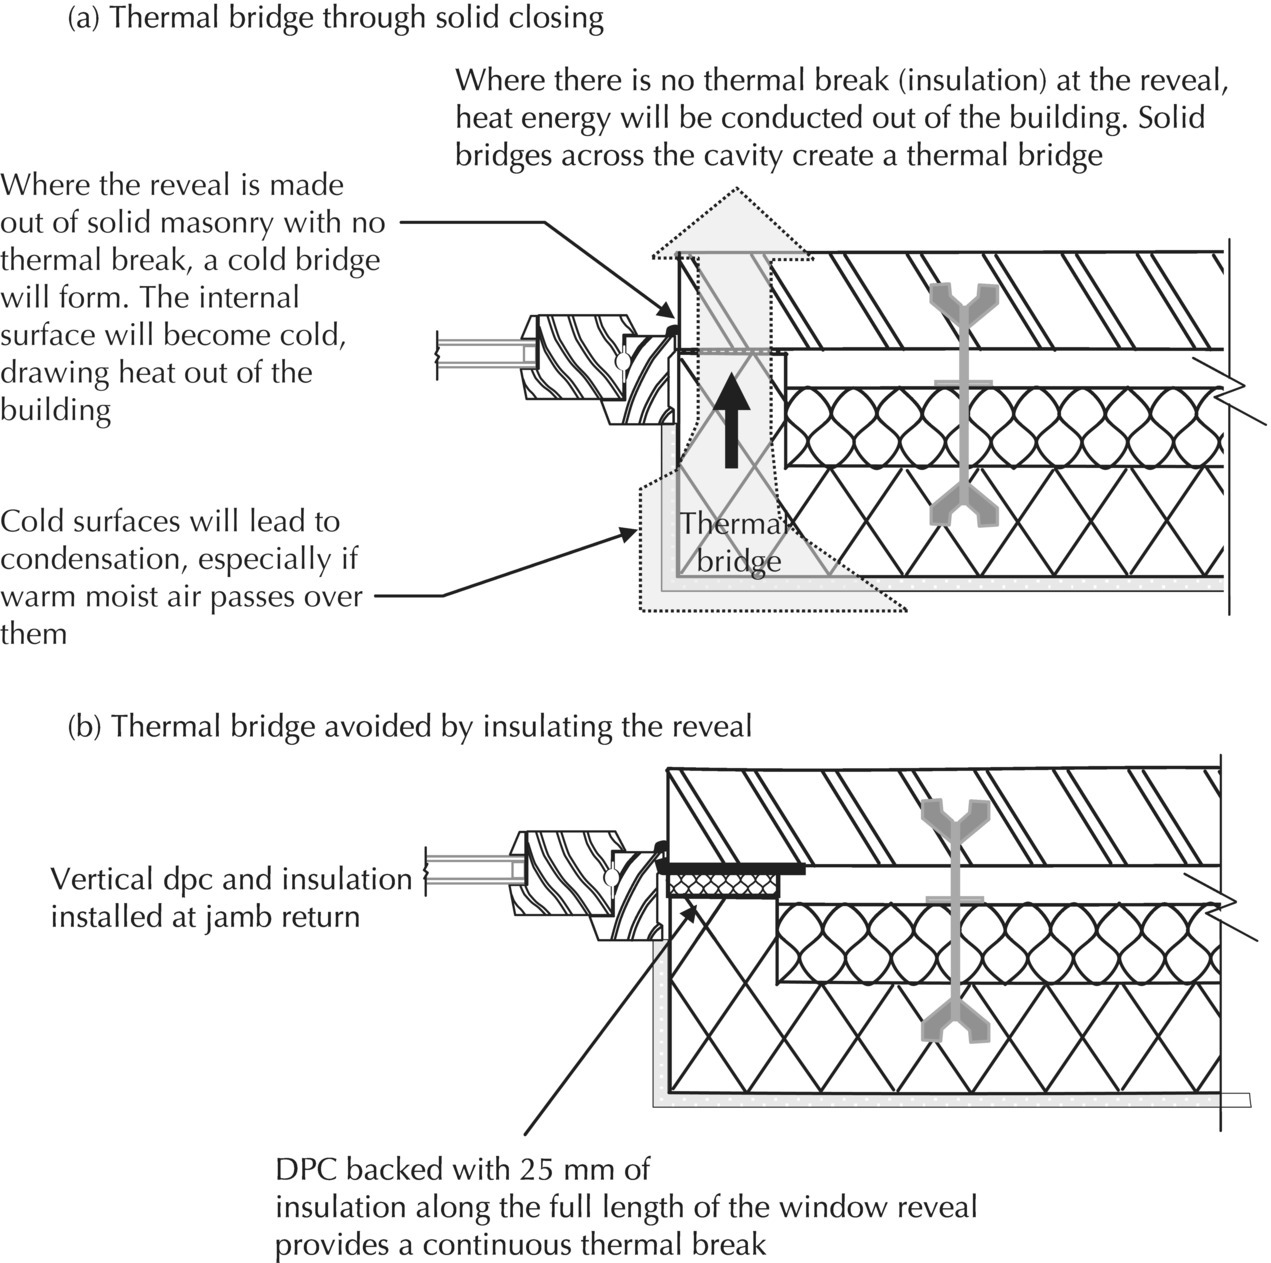 2 Illustrations displaying thermal bridge through solid closing, with 2 upward arrows depicting warm moist air passing over cold surfaces (top) and thermal bridge avoided by insulating the reveal (bottom).